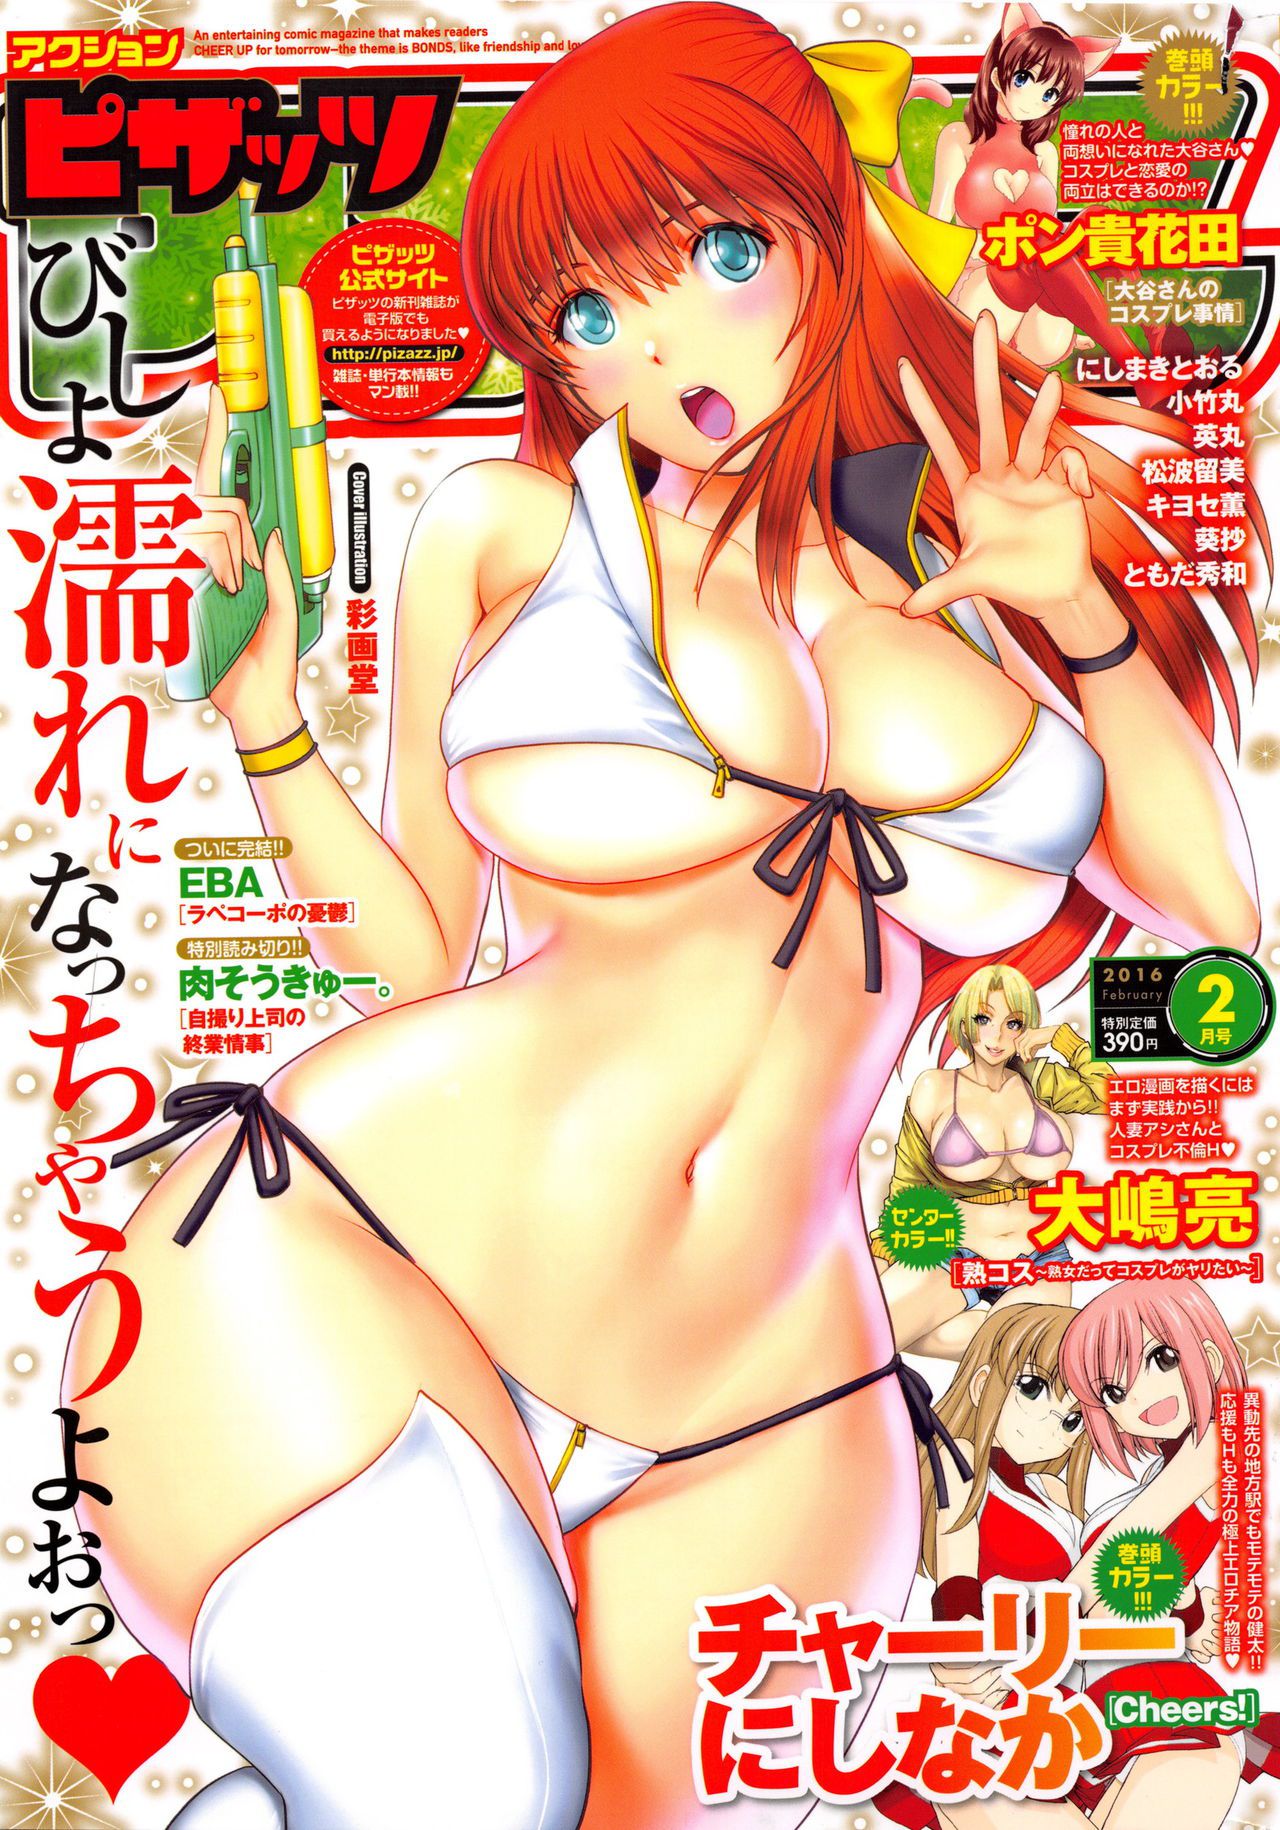 [Saigado] Cover Illustrations [彩画堂] Cover Illustrations 97